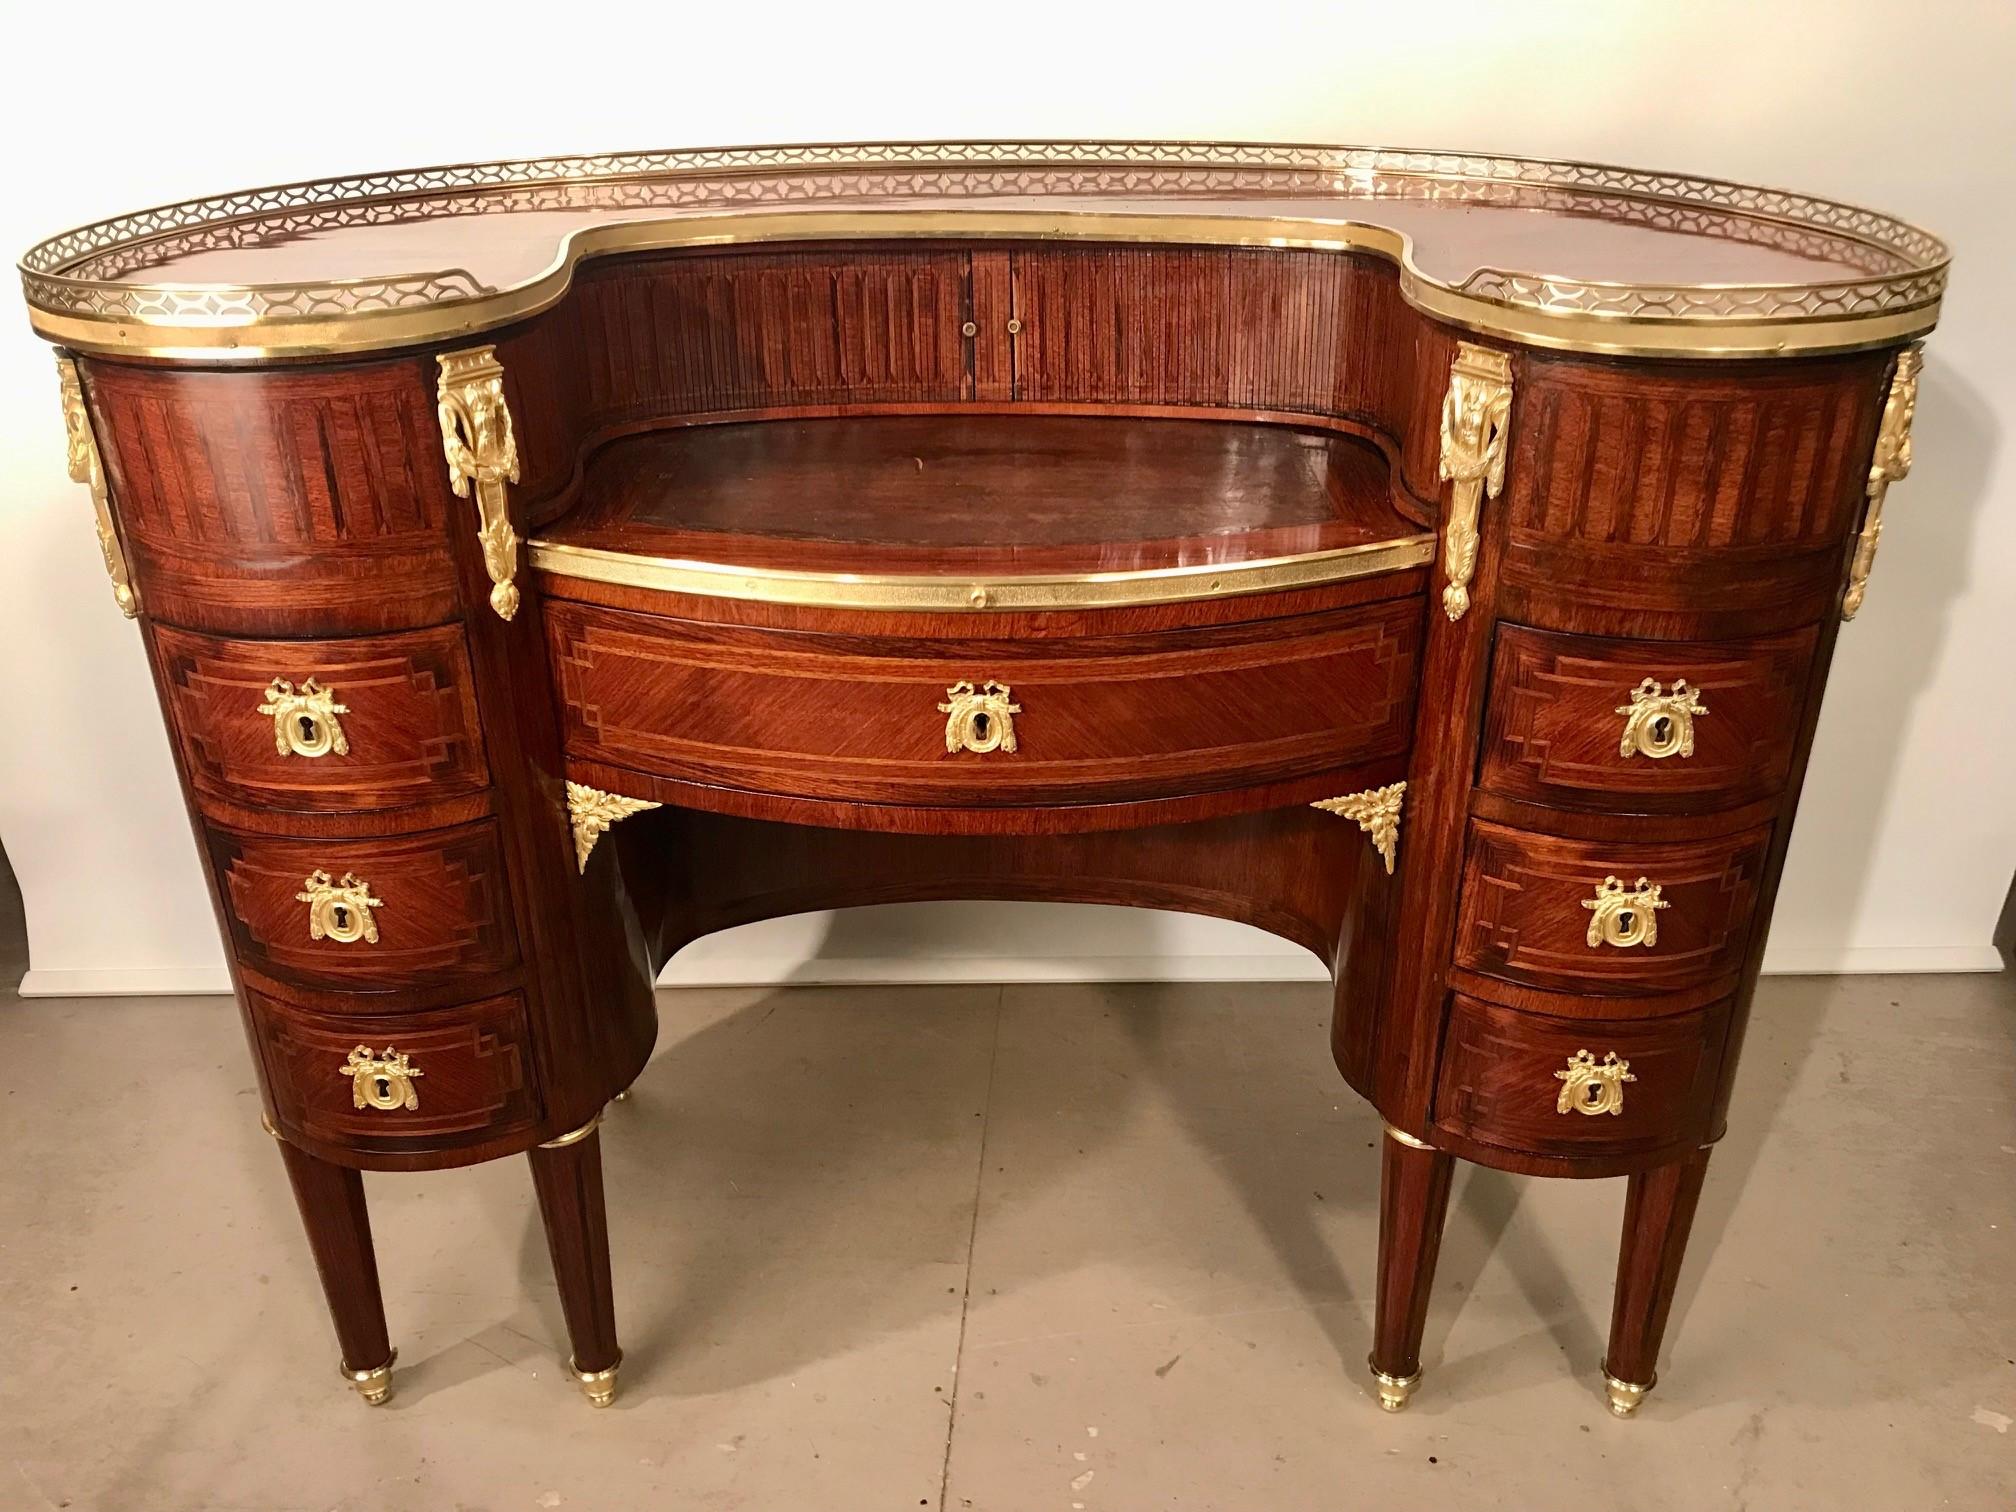 Hand-Crafted Antique French Louis XVI Style Mahogany and Parquetry Bureau a Rognon For Sale